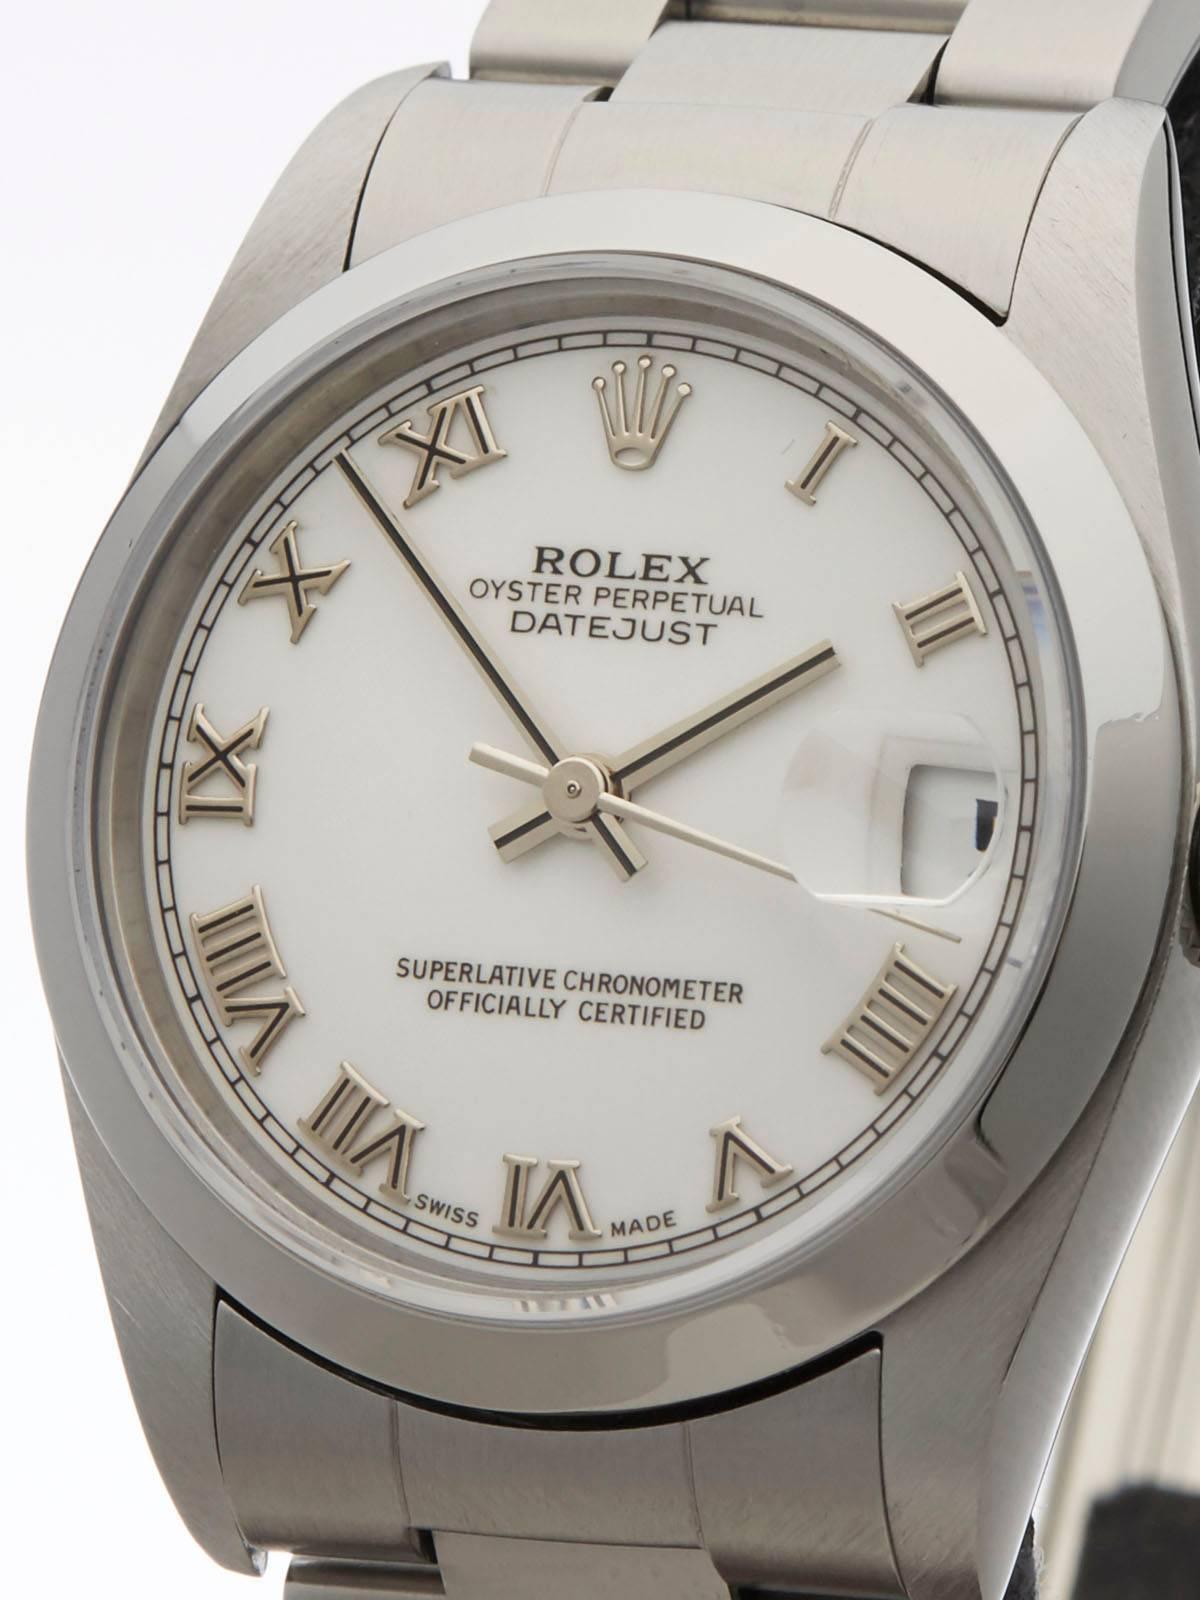 Ref: W3197
Model: 78240
Serial: A39****
Condition: 9 - Excellent condition
Age: 1st December 2000
Case Diameter: 31 mm
Box and Papers: Box, Manuals and Guarantee 
Movement: Automatic
Case:  Stainless Steel	
Dial: White Roman
Bracelet: Stainless